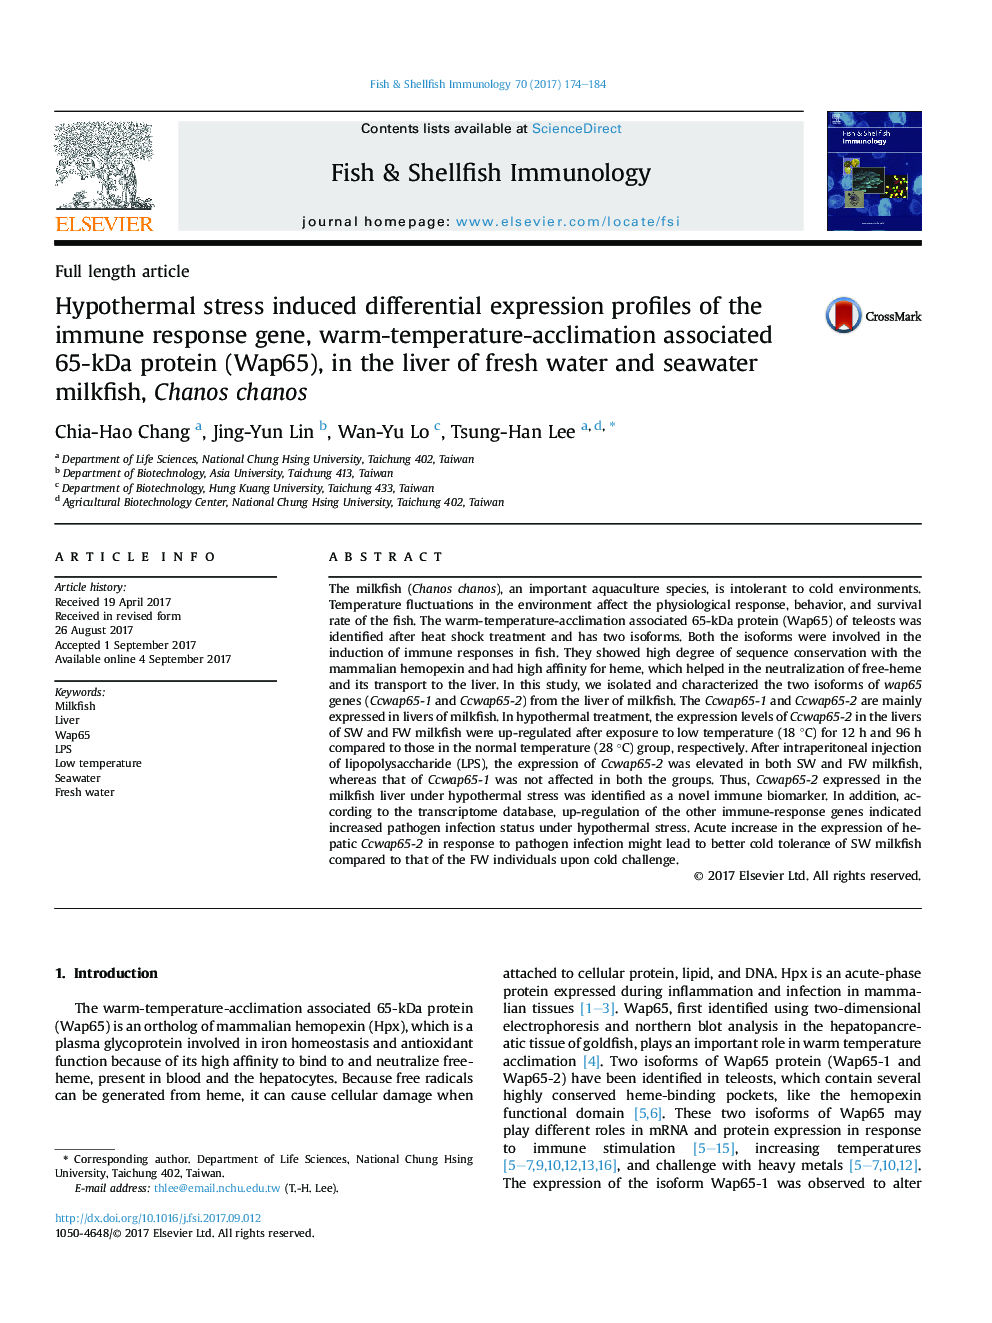 Hypothermal stress induced differential expression profiles of the immune response gene, warm-temperature-acclimation associated 65-kDa protein (Wap65), in the liver of fresh water and seawater milkfish, Chanos chanos